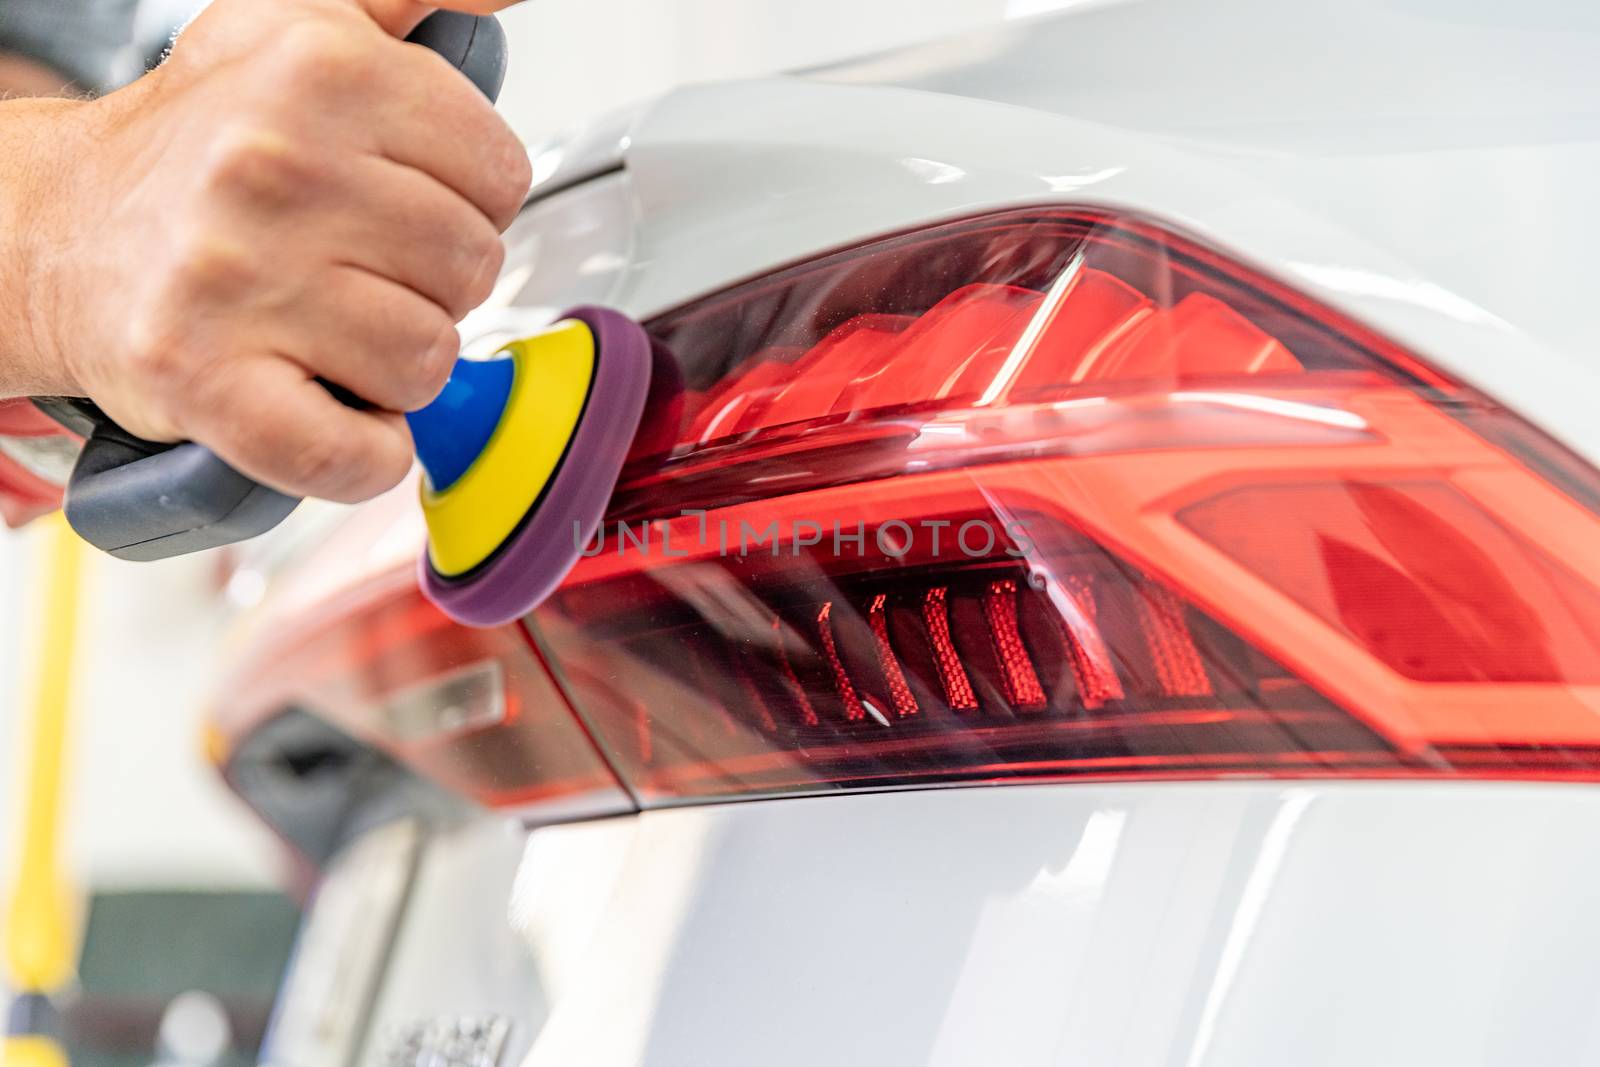 manual polishing of the headlight of luxury cars with the application of protective equipment.